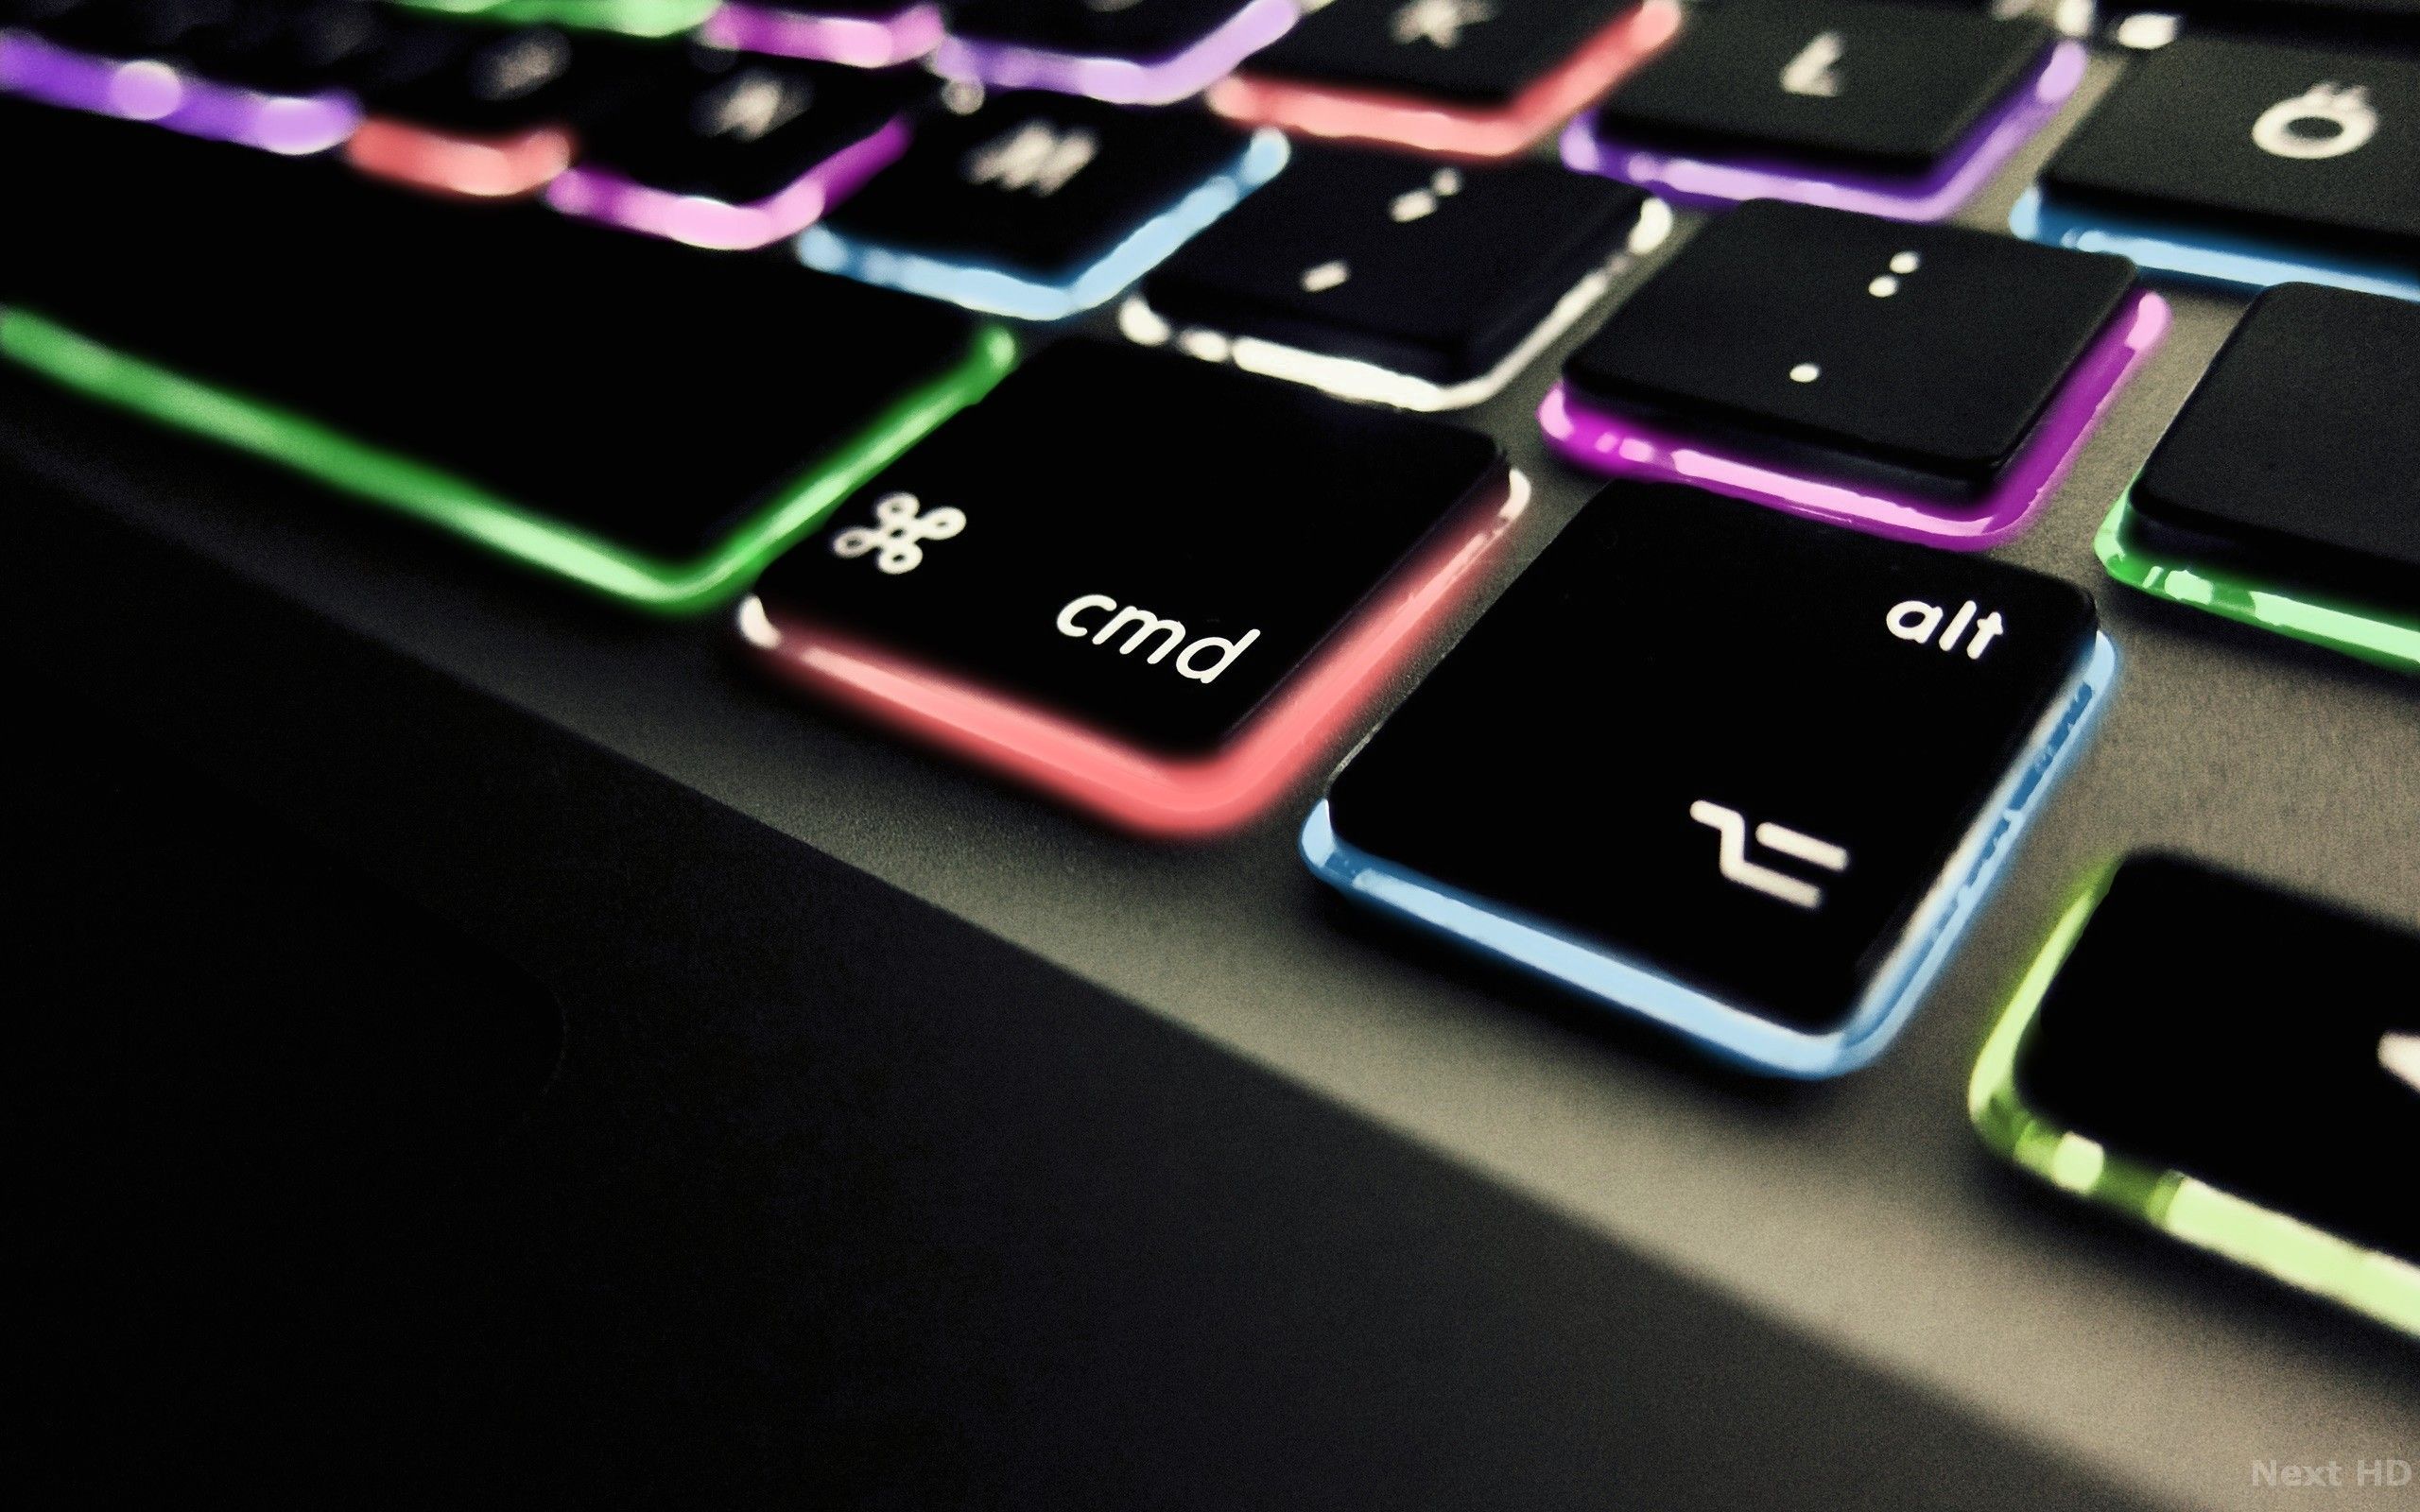 Macbook Air Keyboard HD Picture HD Background Wallpapers Free